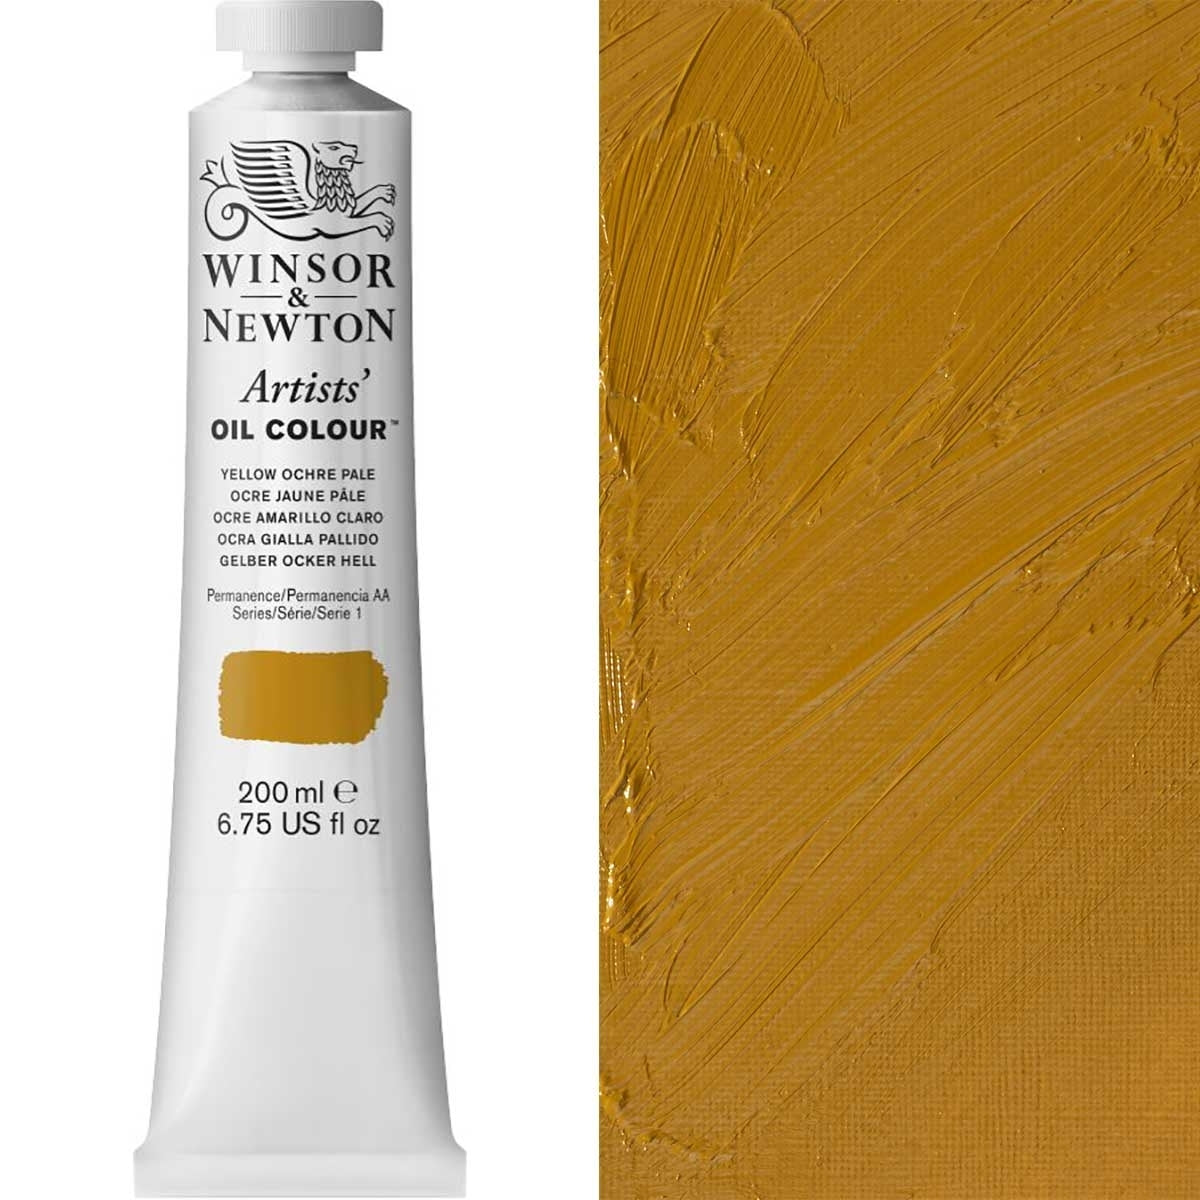 Winsor and Newton - Artists' Oil Colour - 200ml - Yellow Ochre Pale